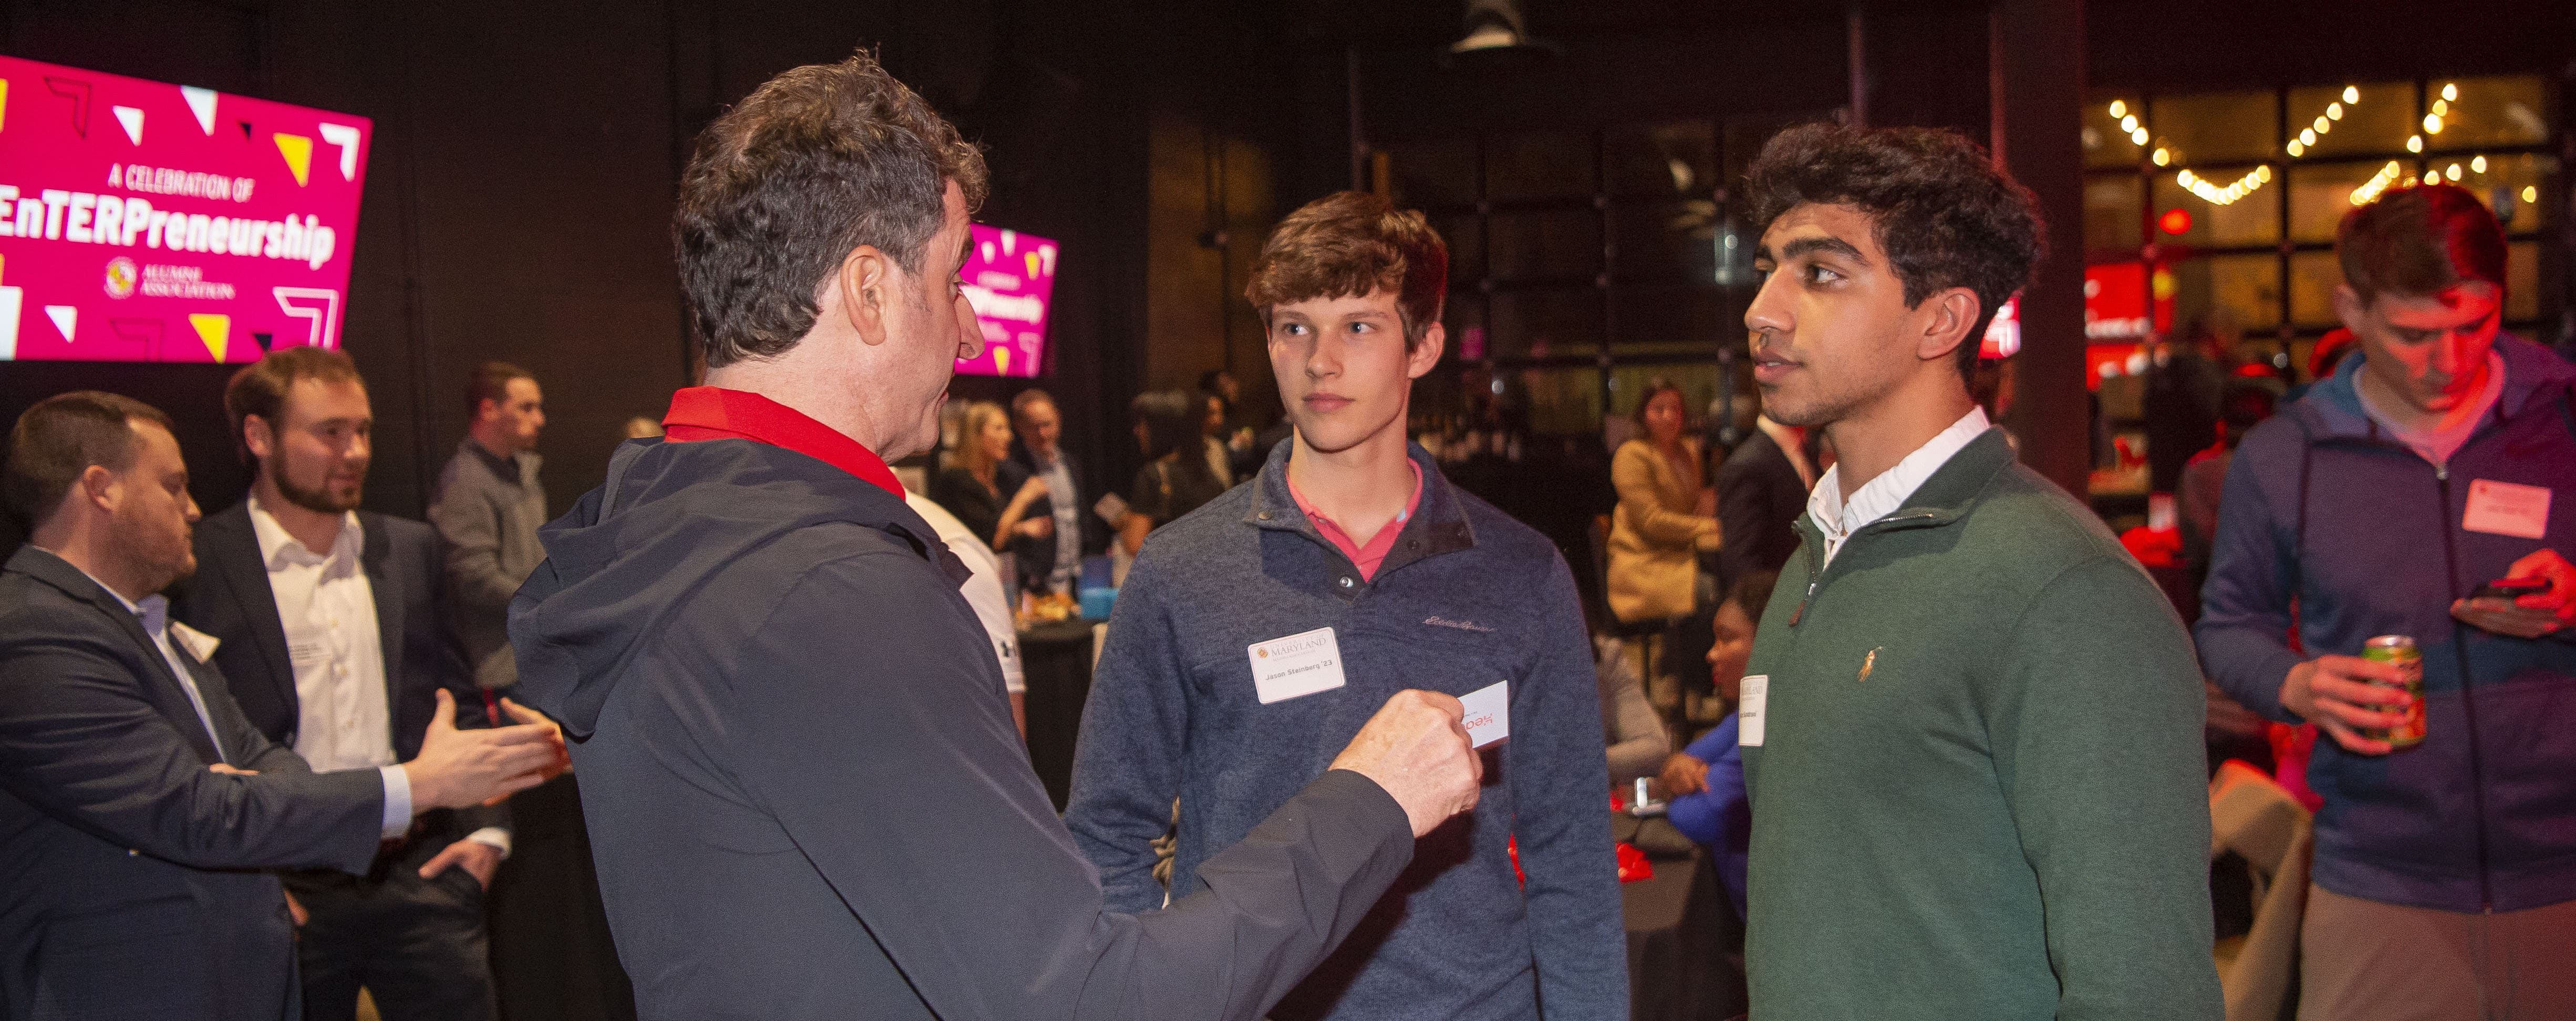 Students networking with Scott Plank